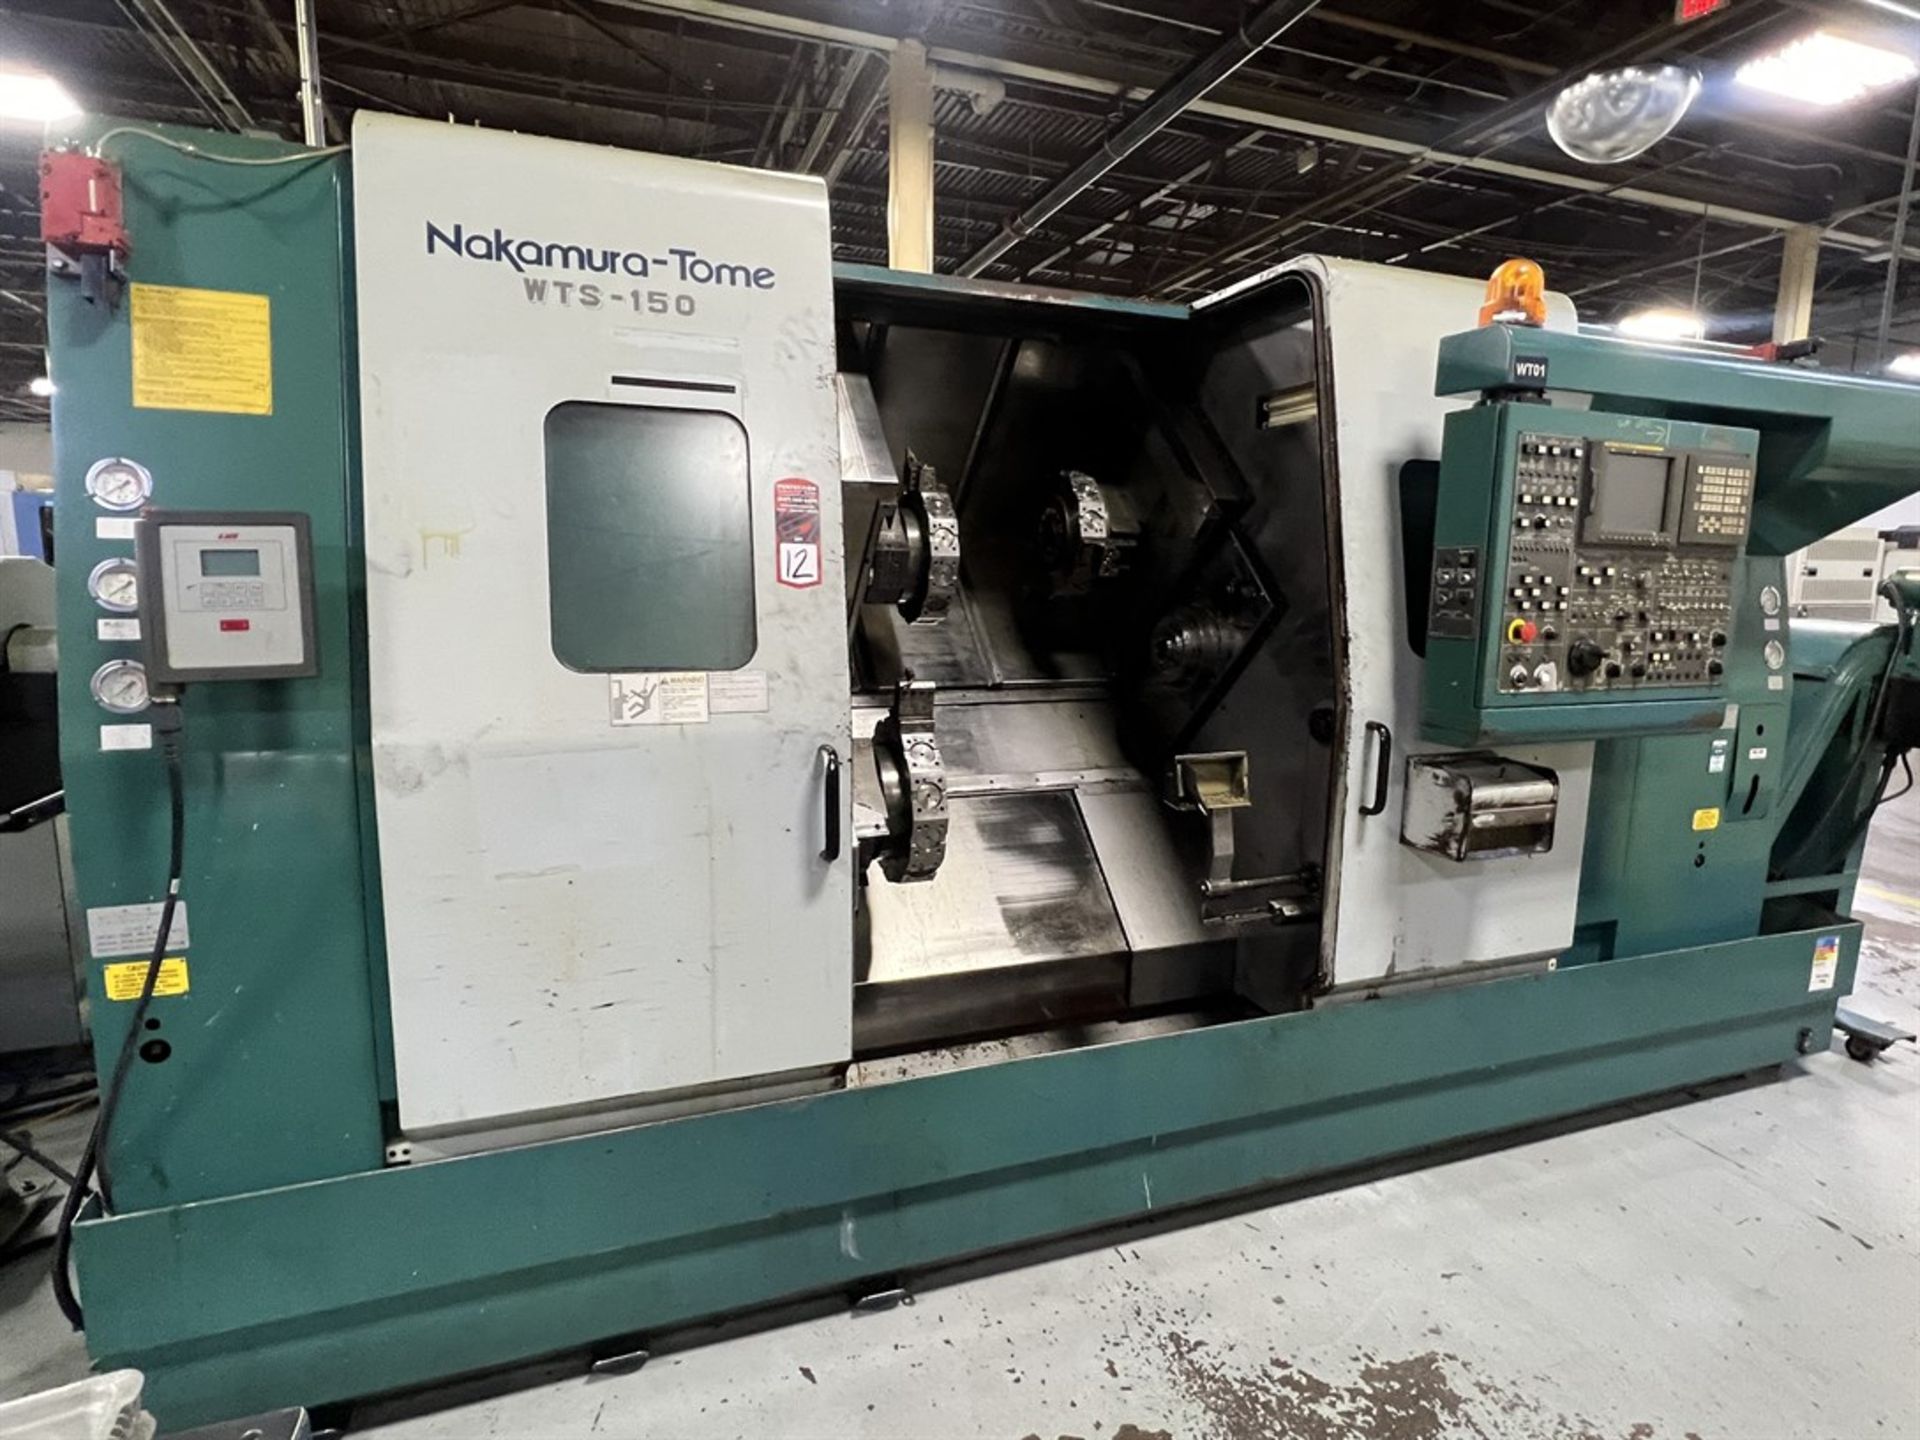 NAKAMURA-TOME WTS-150 CNC Turning Center, s/n V150601, Fanuc 16i-T Control, 12.20" Max Turning - Image 2 of 13